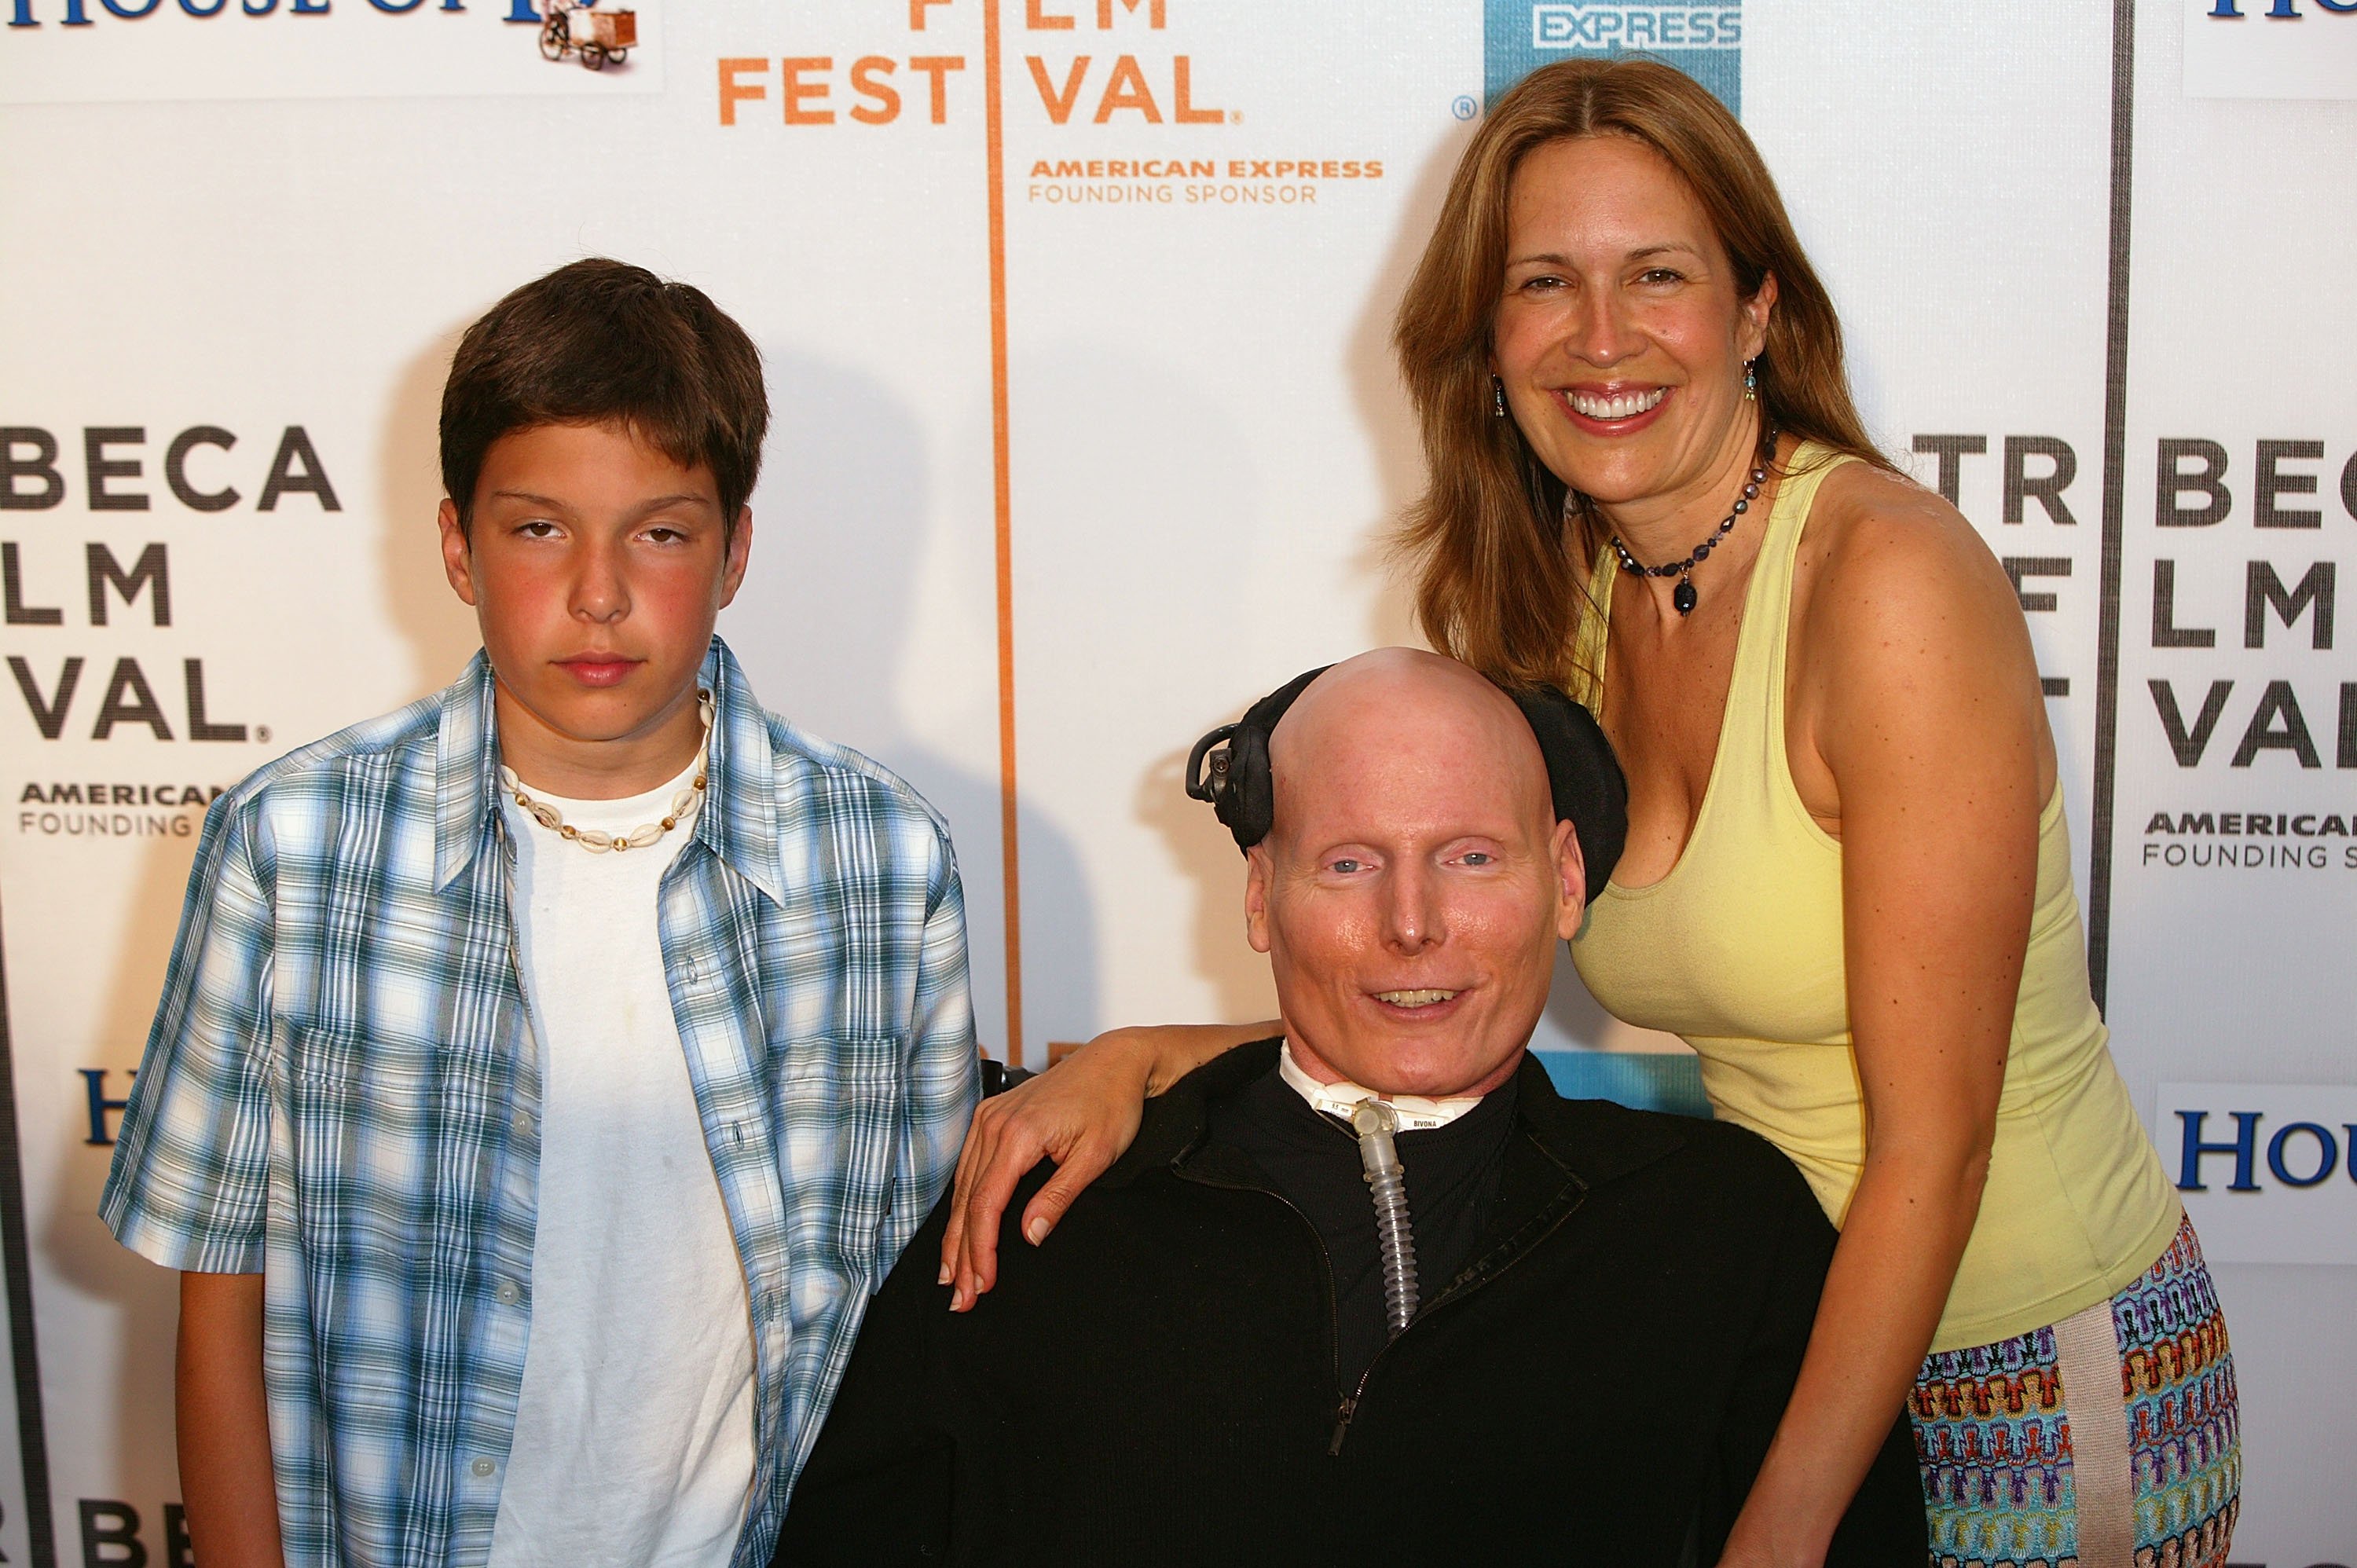 Christopher Reeve with his wife Dana Reeve and son Will attend the screening of "House of D" in New York City in 2004 | Photo: Getty Images